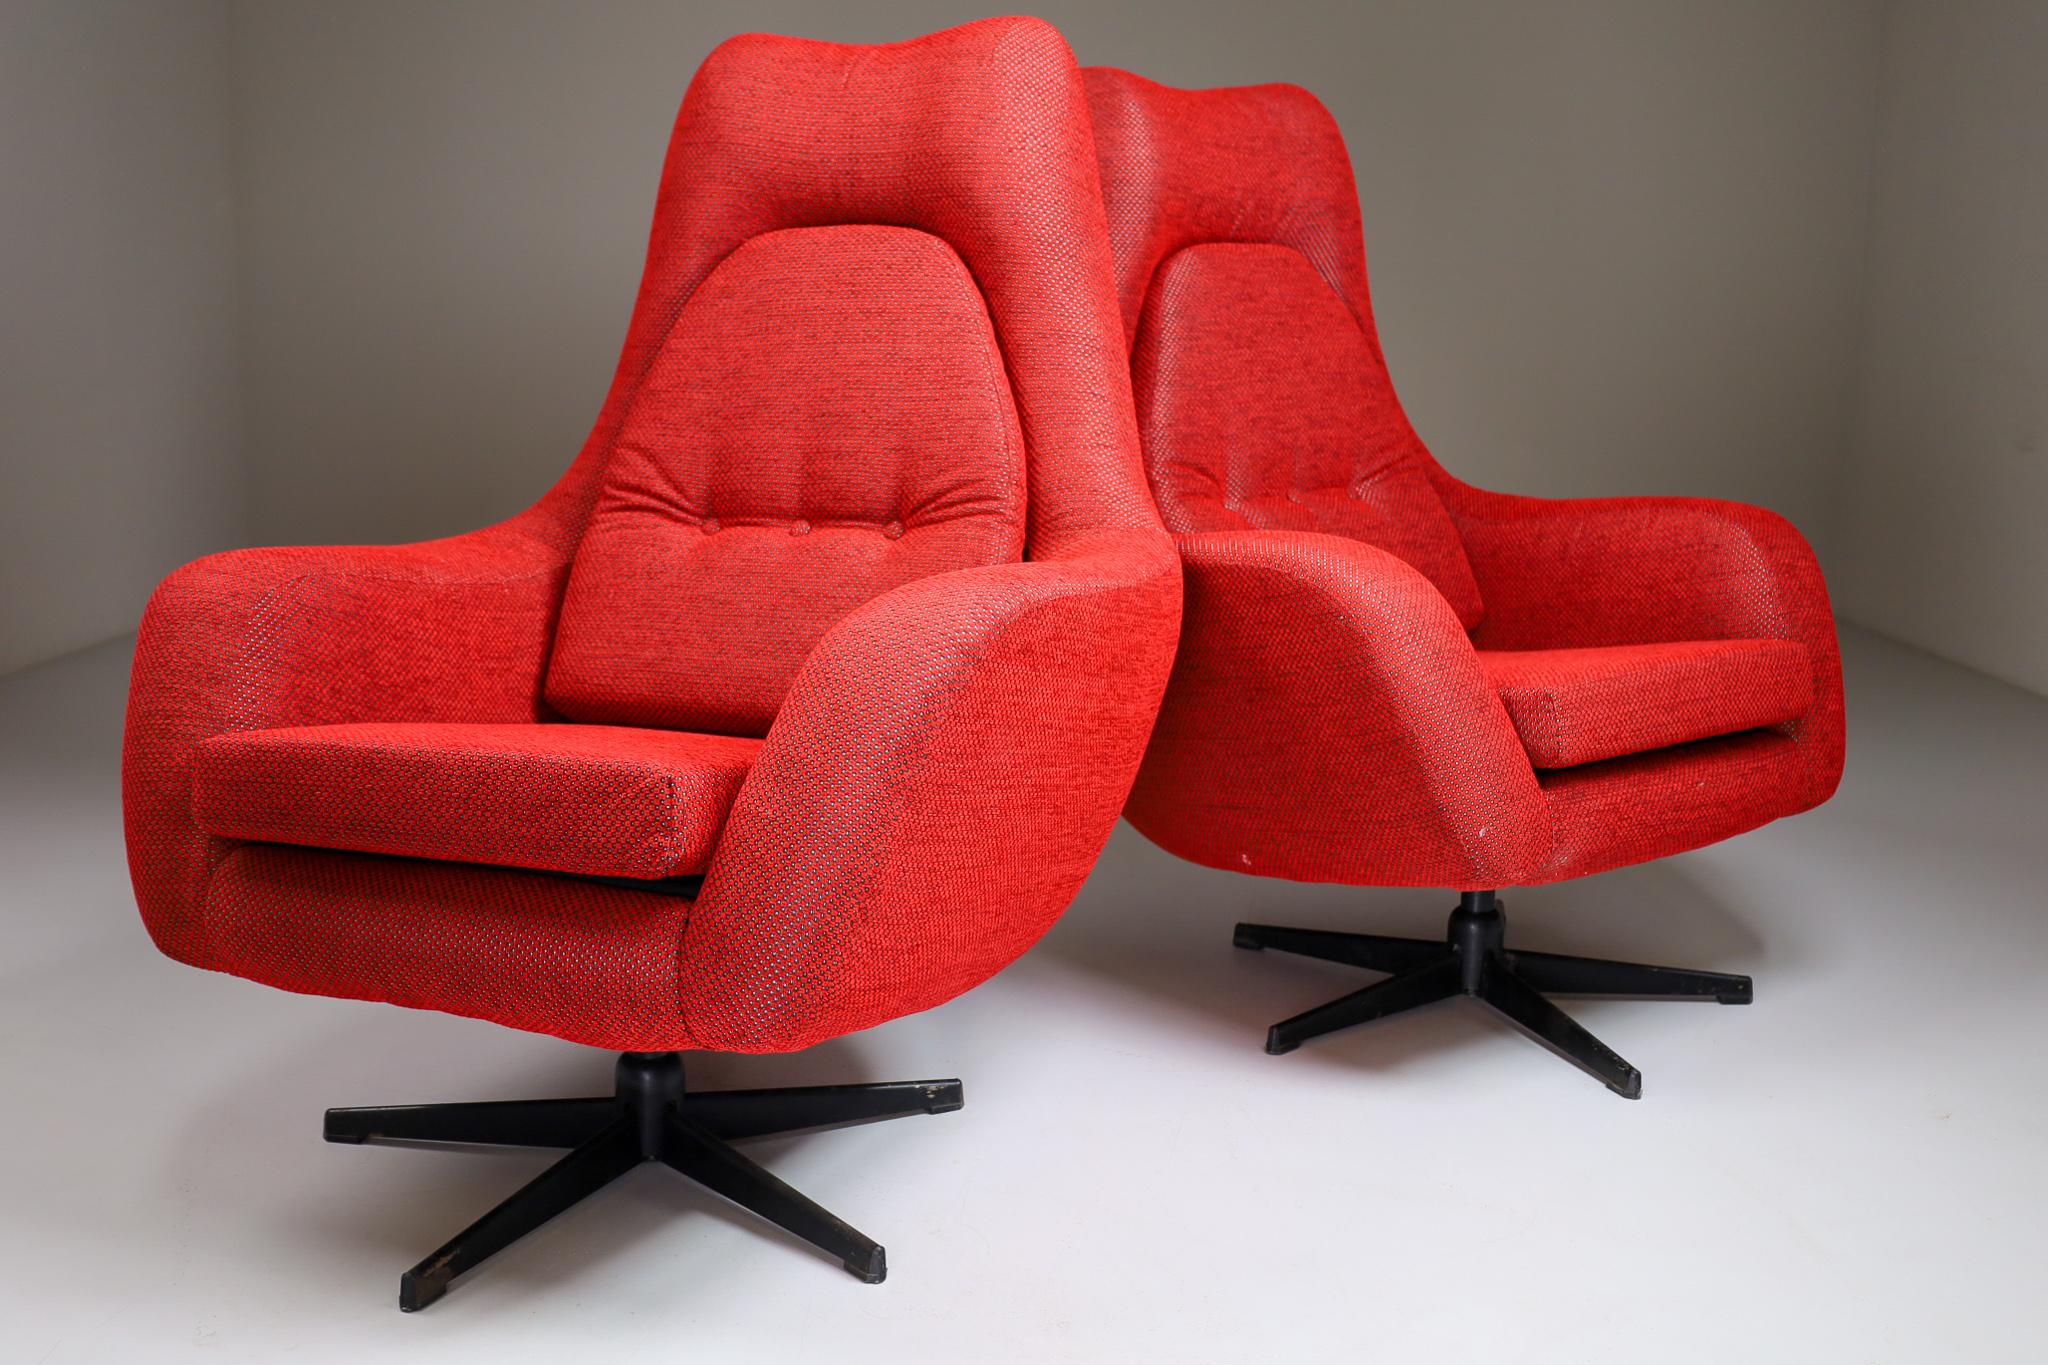 Mid-Century Modern Pair of Swivel Chairs in New Reupholstered Red Fabric, Czech Republic 1970 For Sale